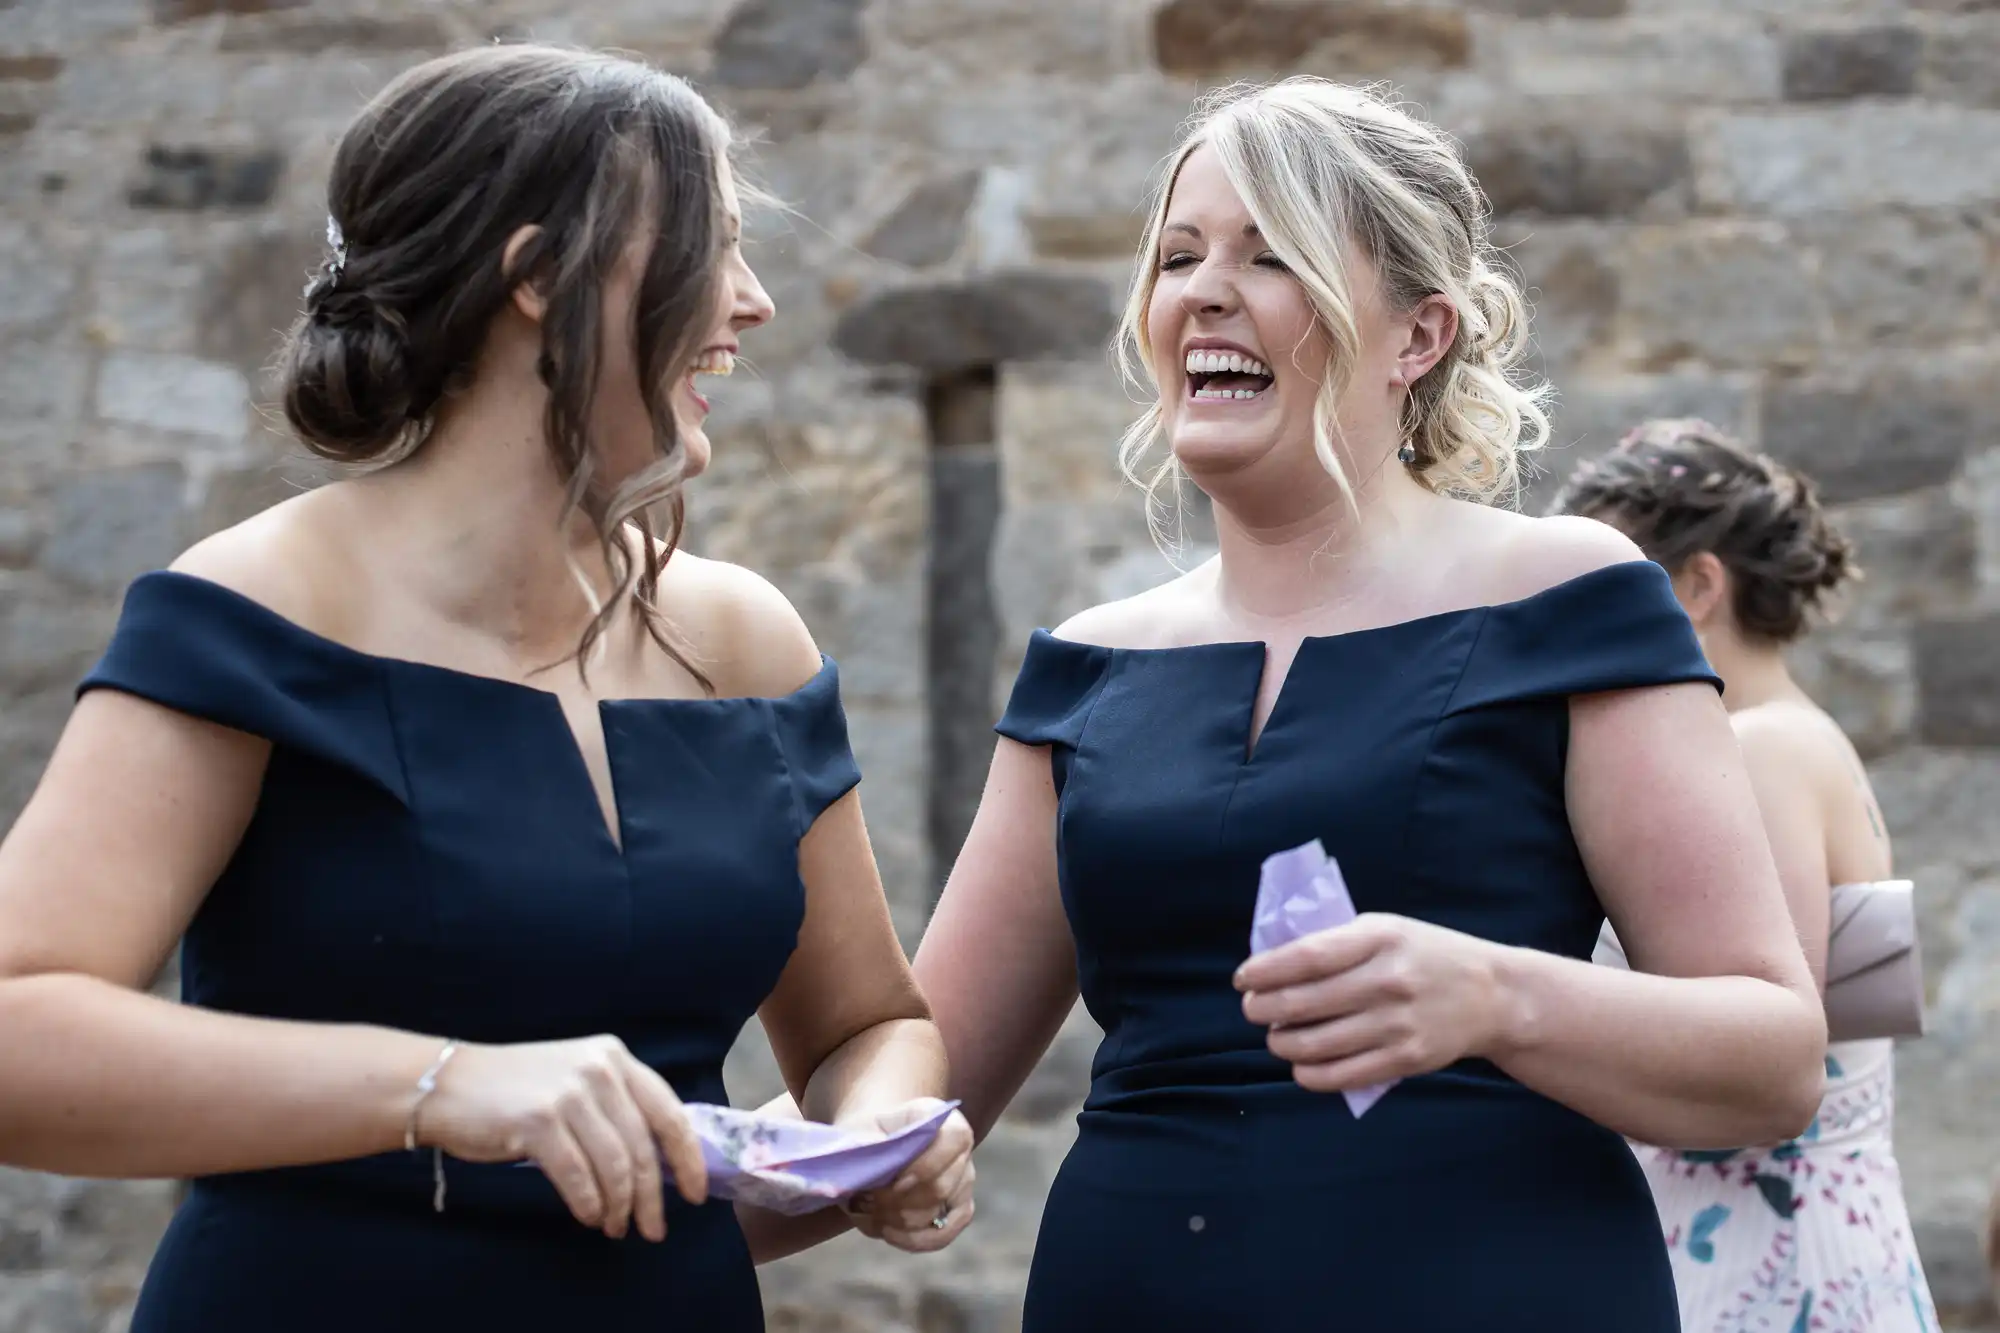 Two women in navy blue dresses laughing joyfully at an outdoor event, holding small purple papers.